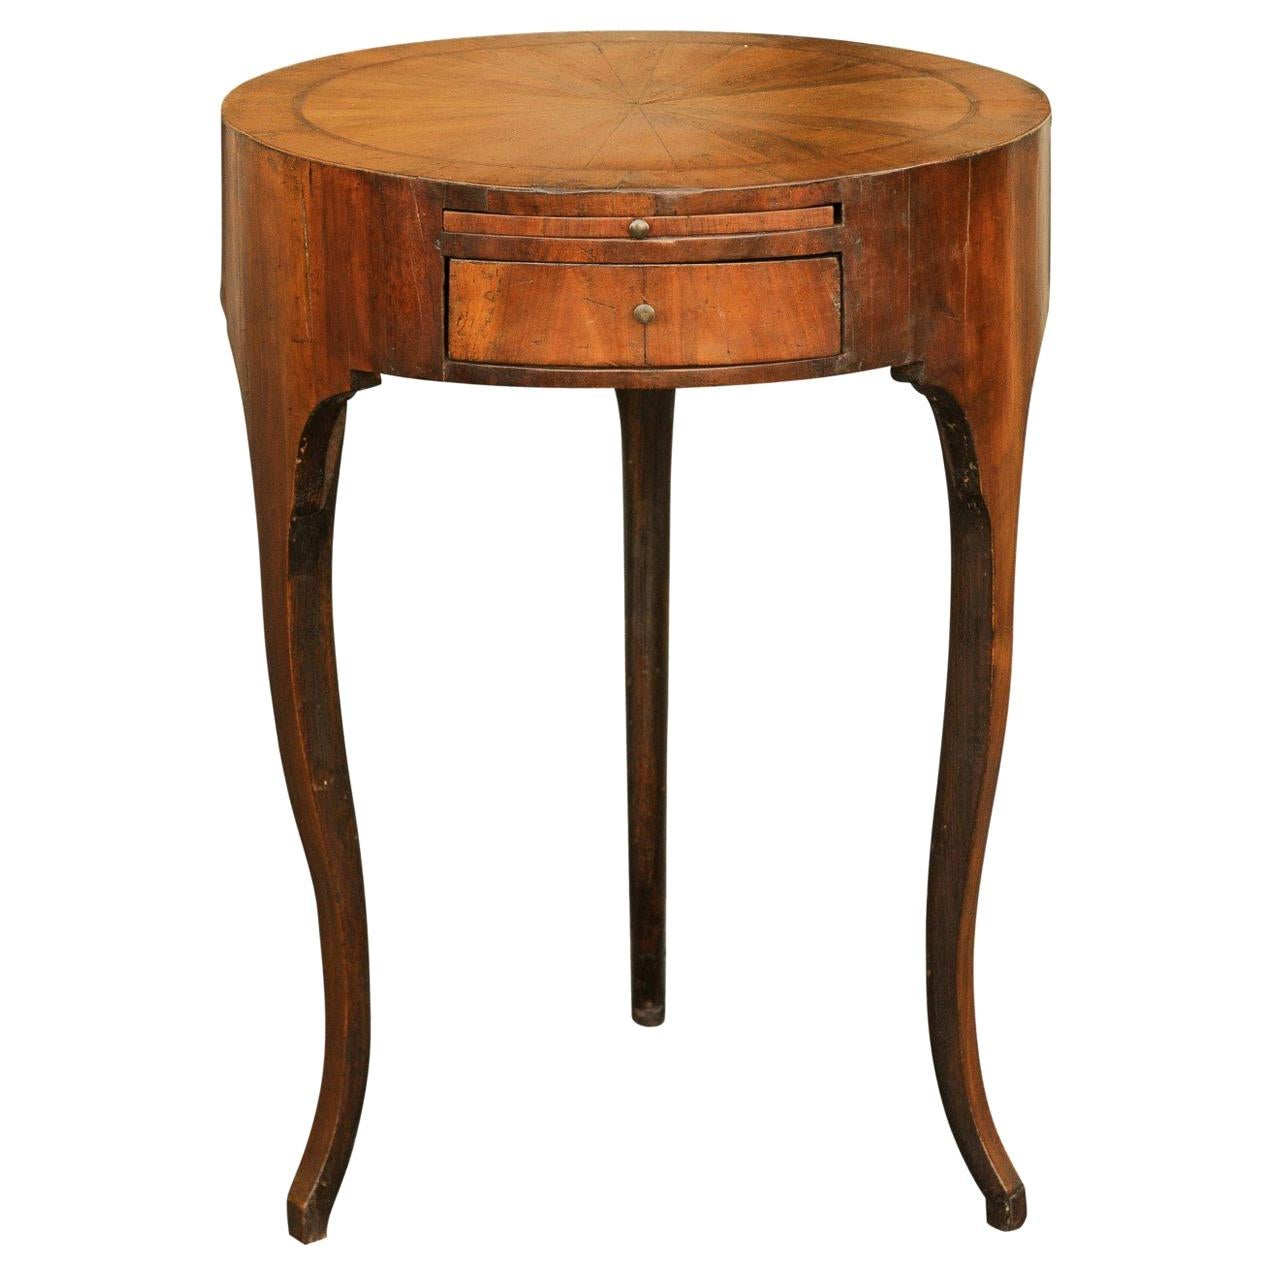 French Restauration 1820s Walnut Circular Side Table with Radiating Veneer